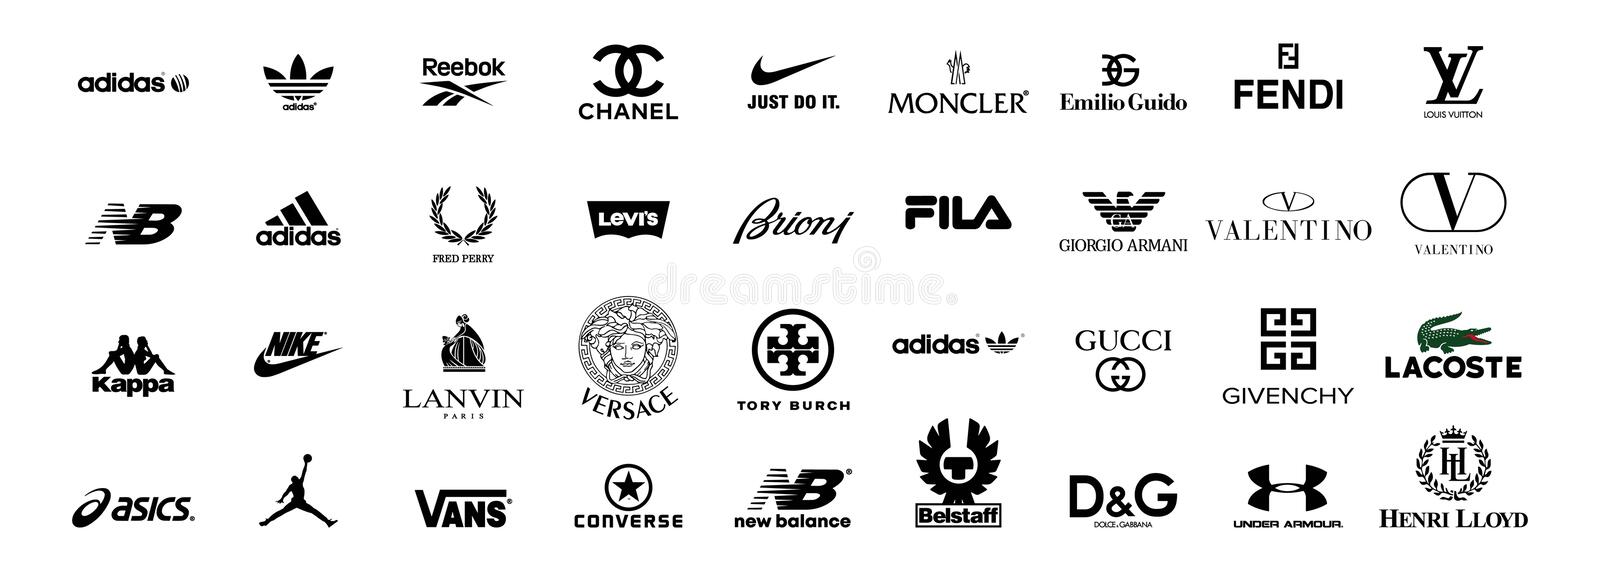 The Best Clothing Brands